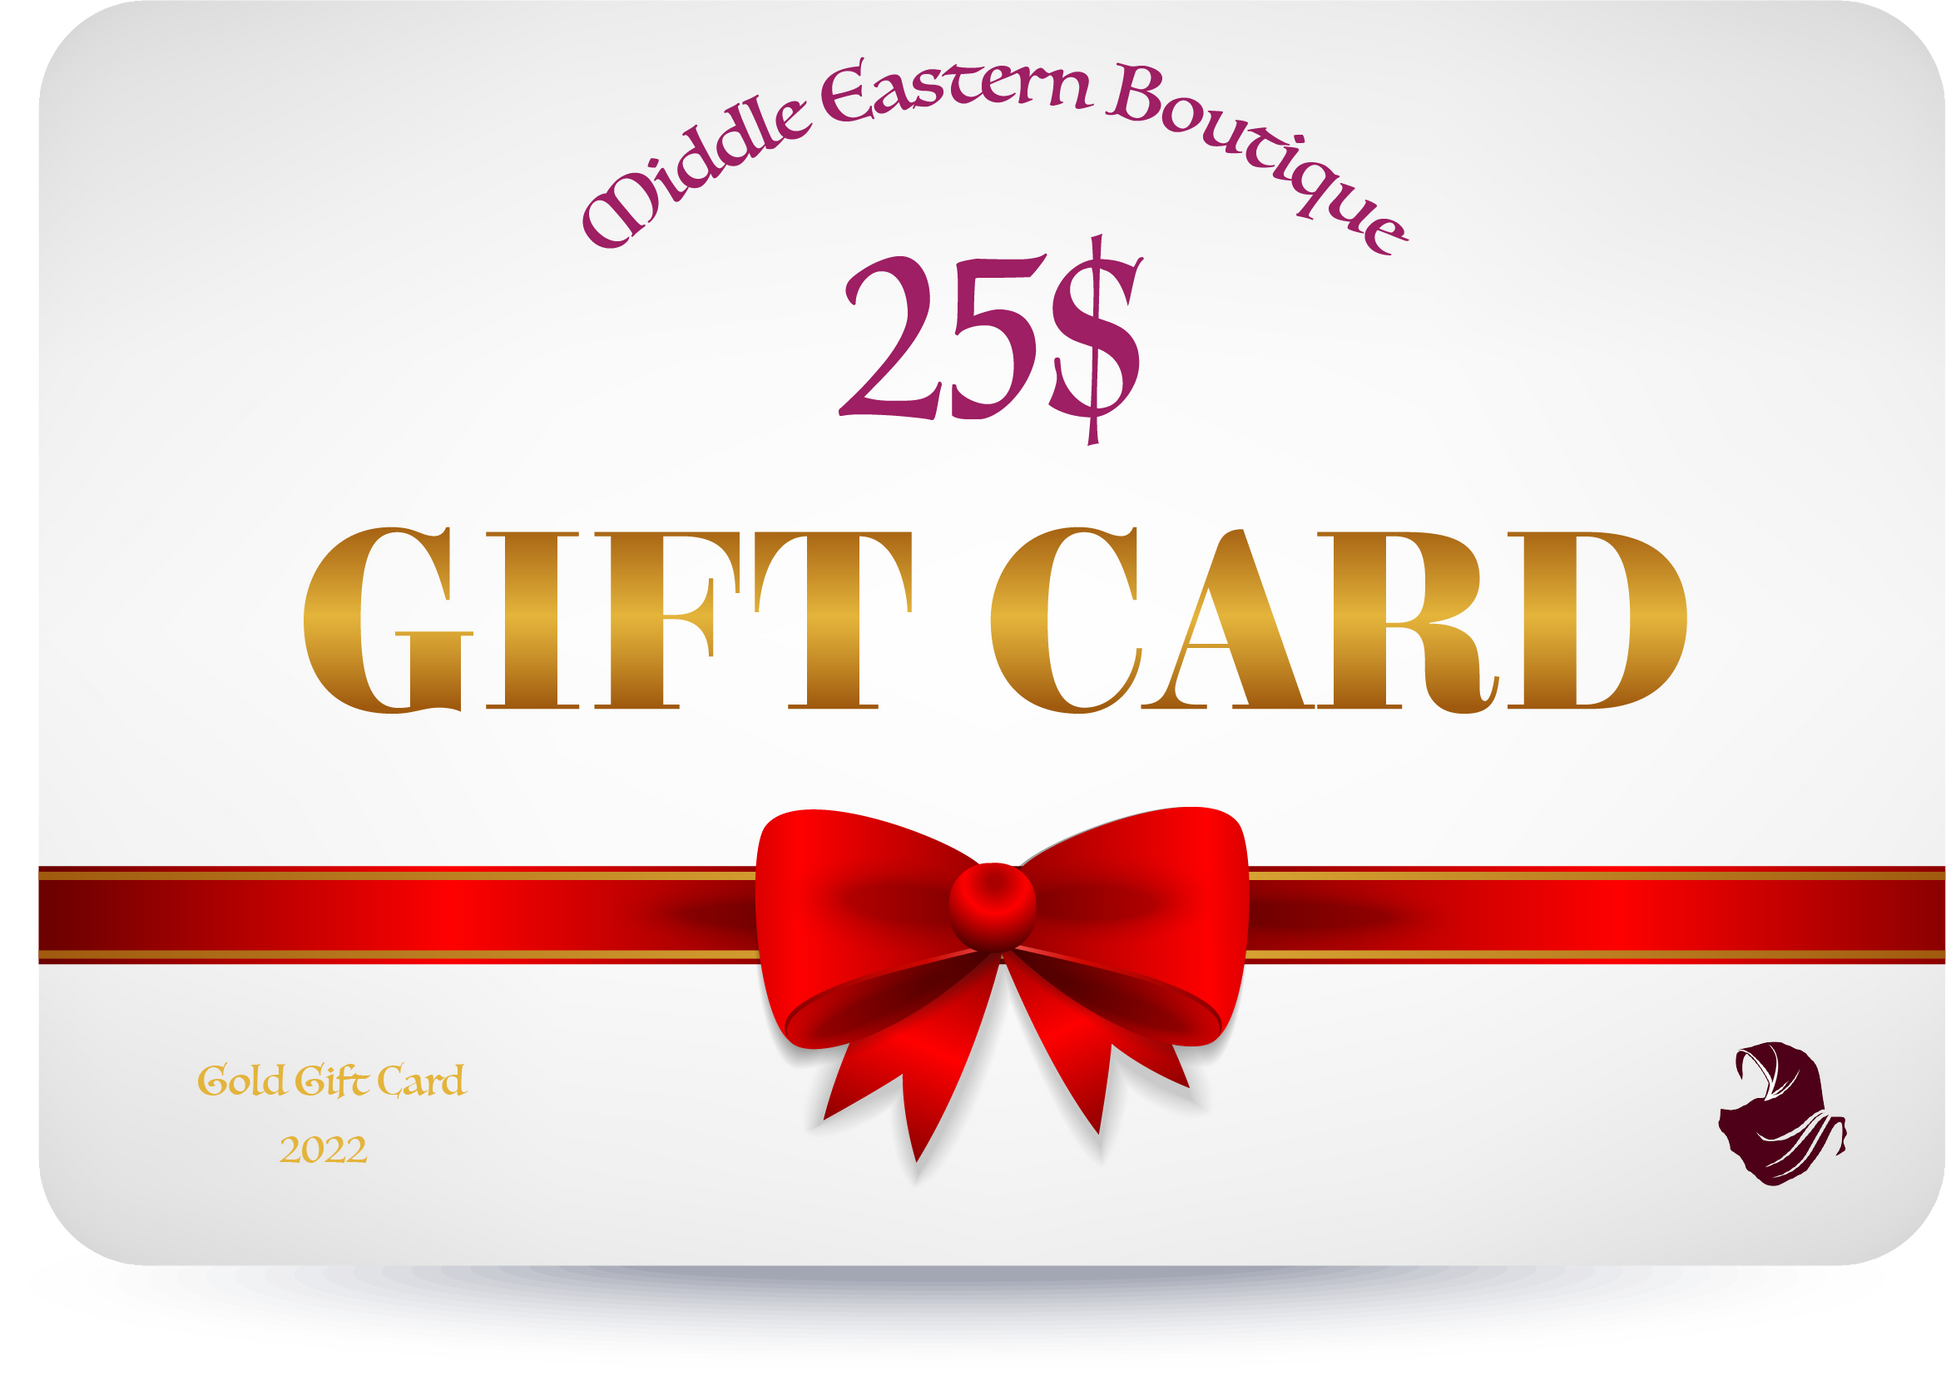 Gold Gift Card Middle Eastern Boutique